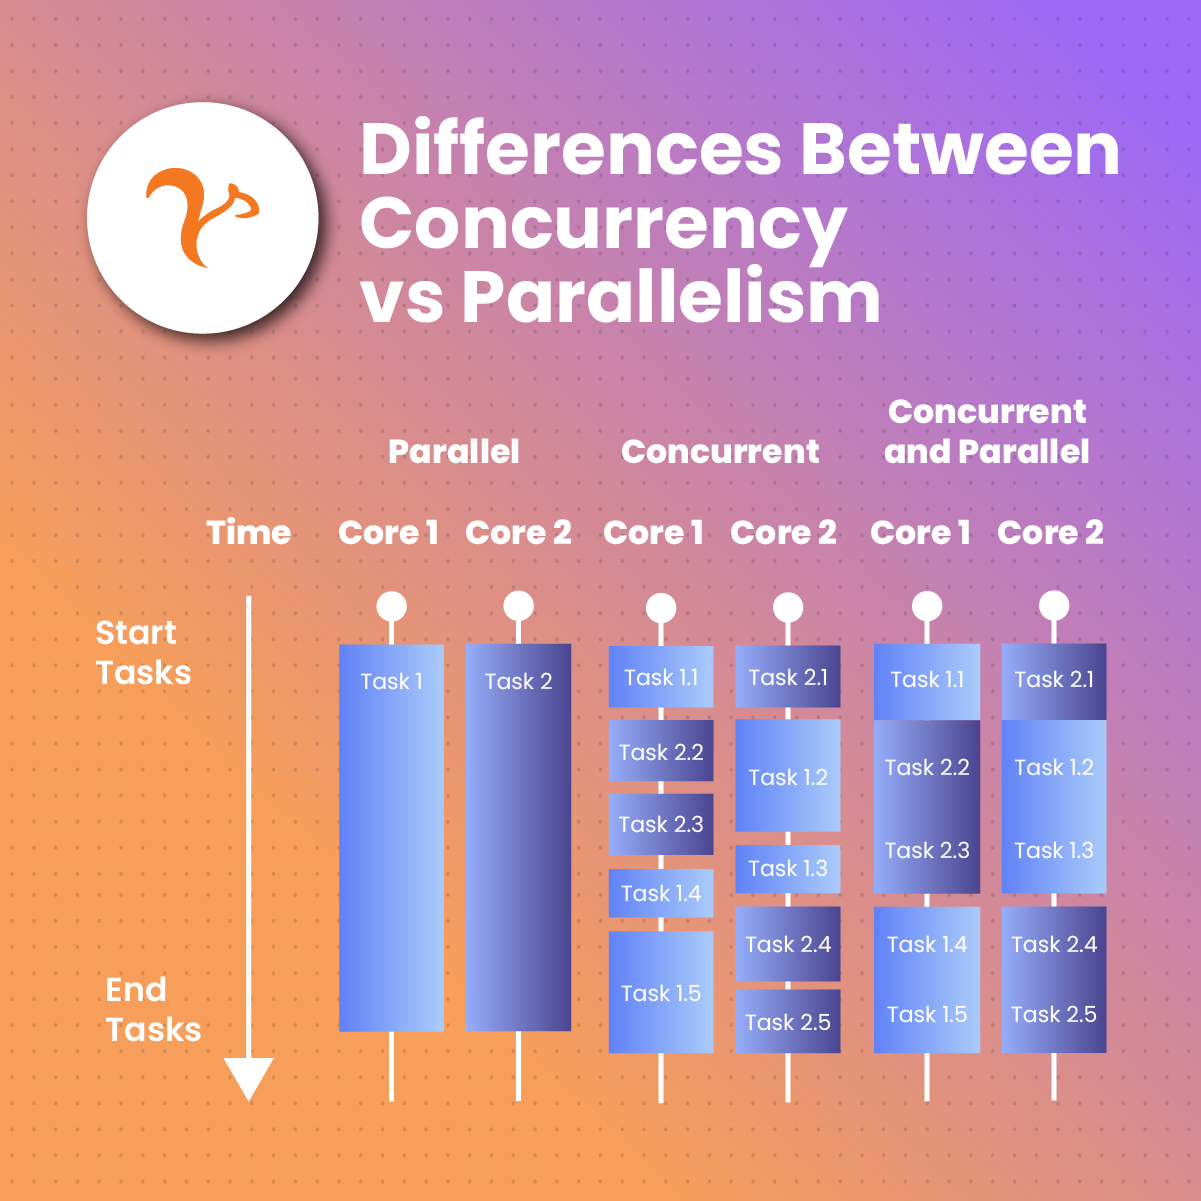 Differences Between Concurrency vs Parallelism